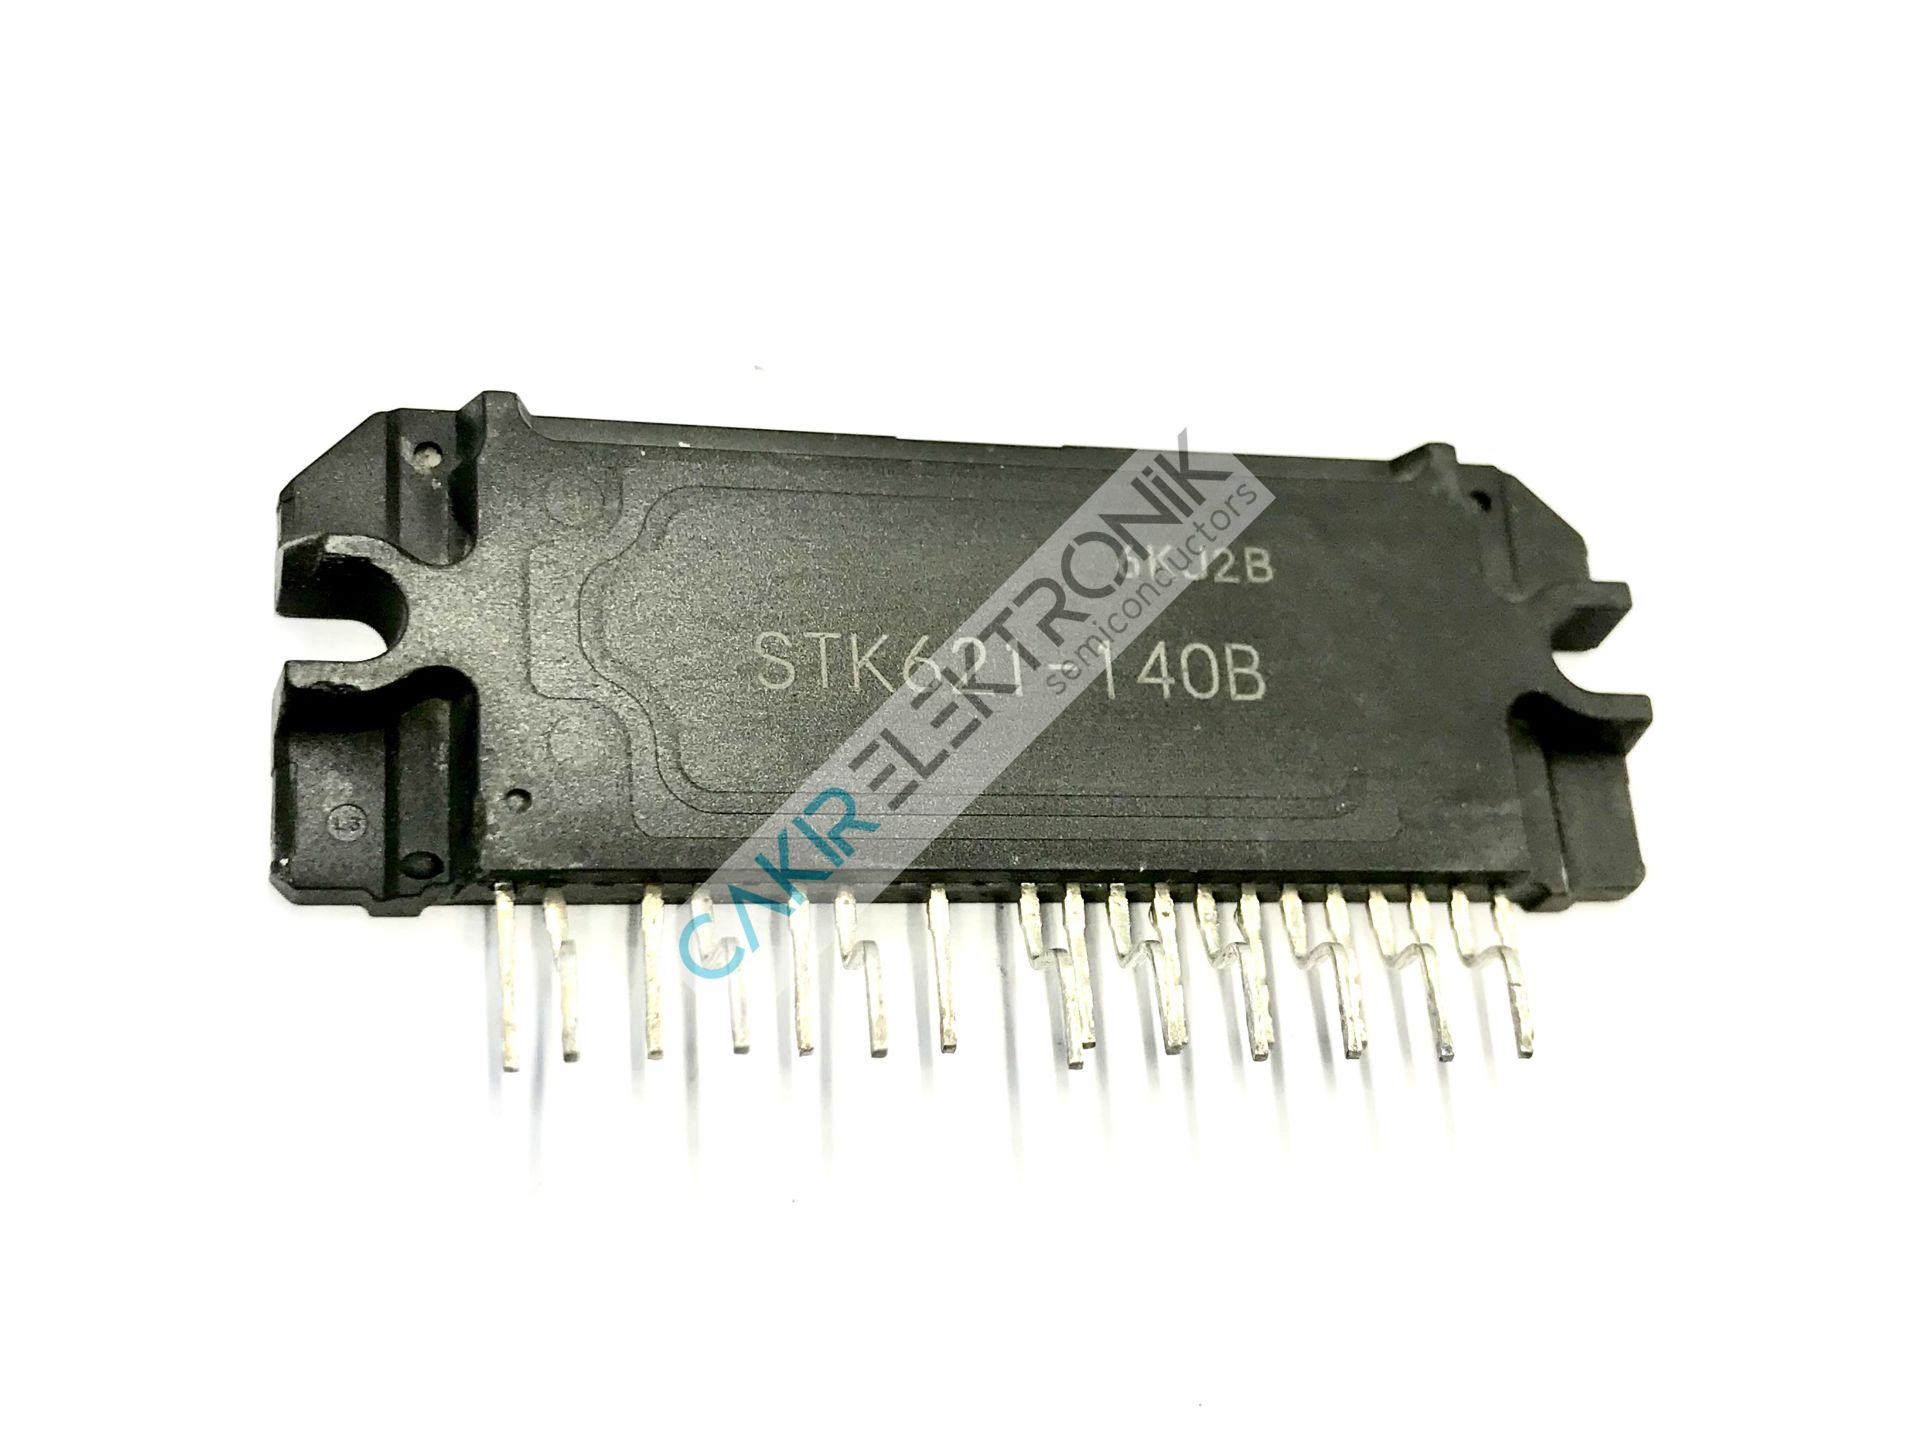 STK621-140B - STK621-140 , Motor/Motion/Ignition Controllers & Drivers 3PHASE INVERTER HIC